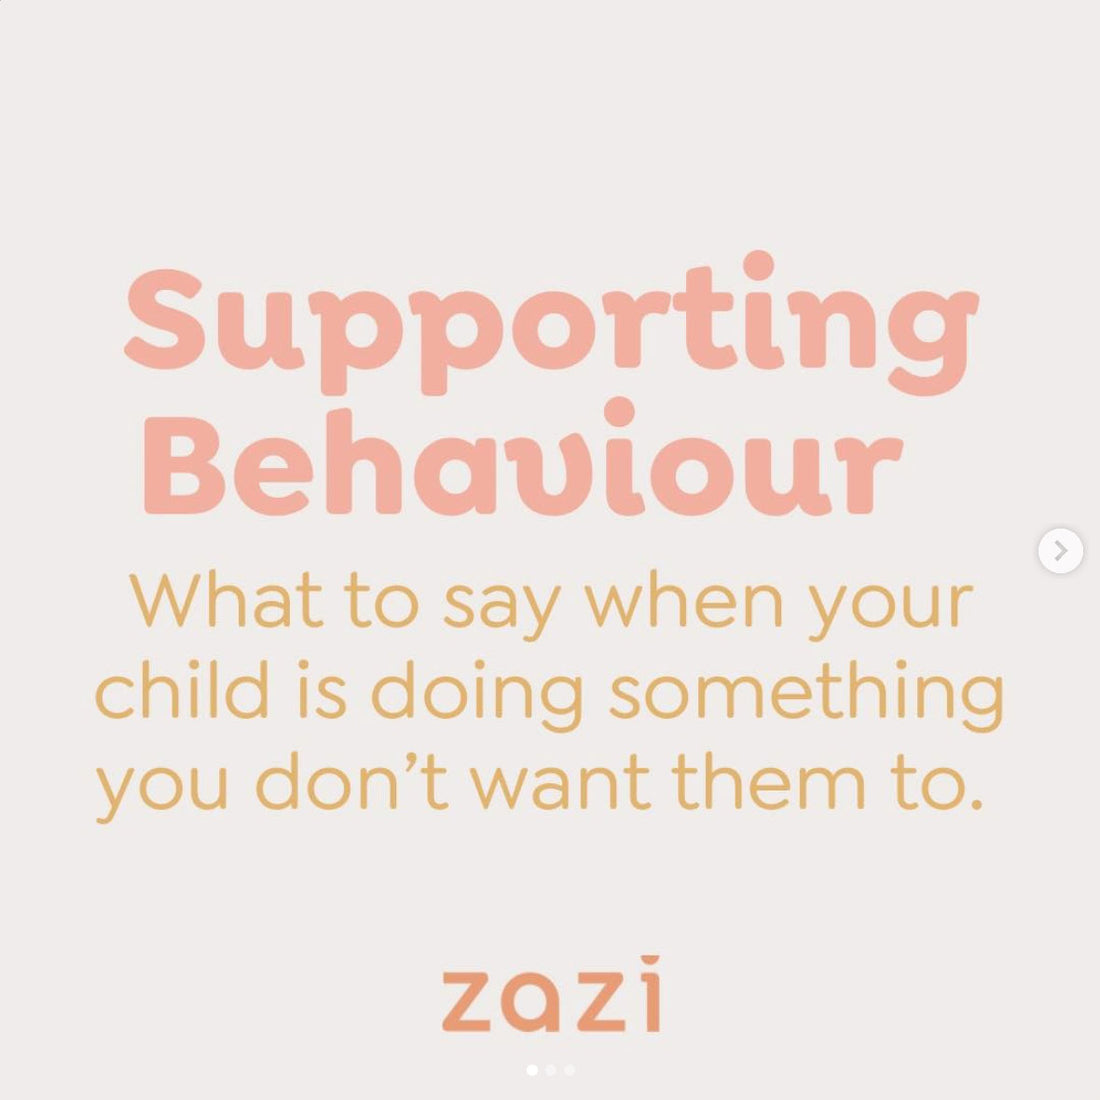 Supporting Behaviour: What to say when your child is doing something you don't want them to do